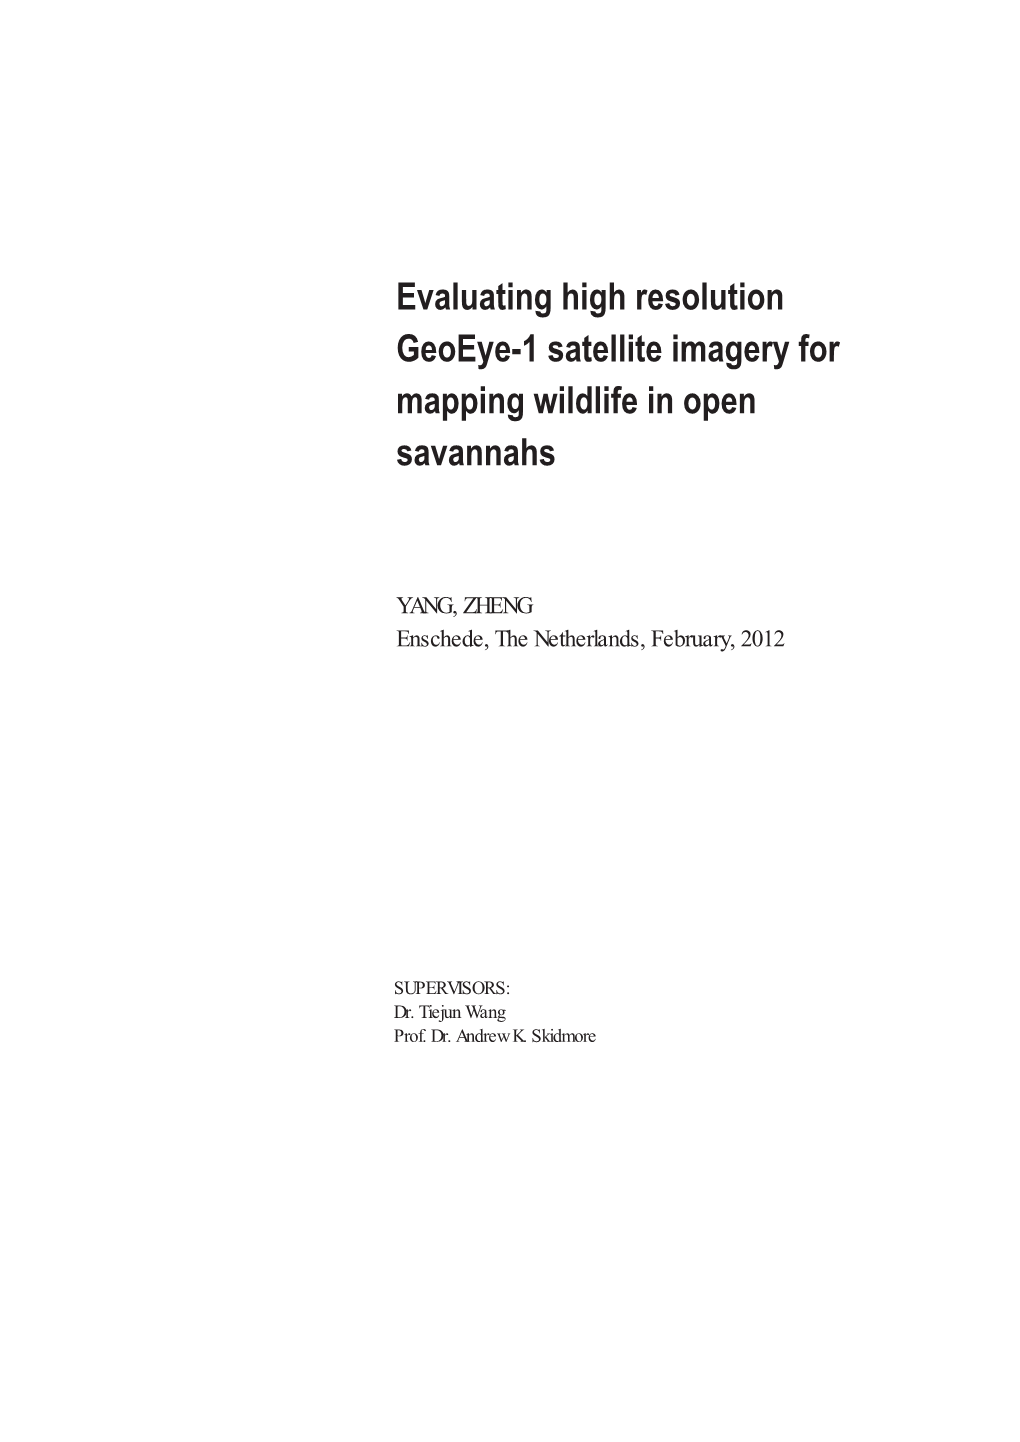 Evaluating High Resolution Geoeye-1 Satellite Imagery for Mapping Wildlife in Open Savannahs